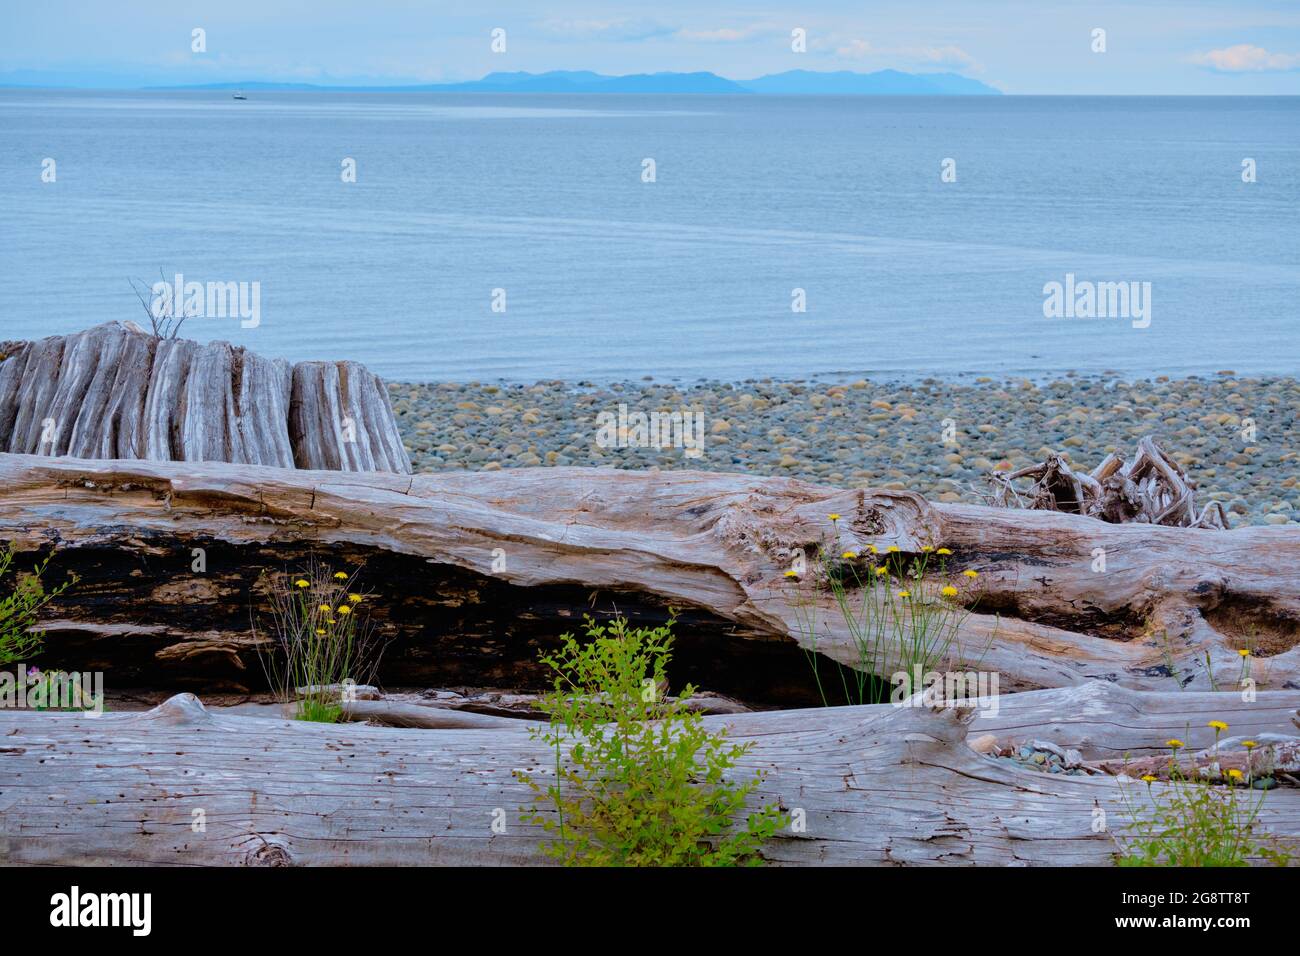 Pebbles, logs, dandelions and large tree stump cover section of beach in Oyster River Nature Park, Campbell River, BC.  In distance is BC mainland. Stock Photo